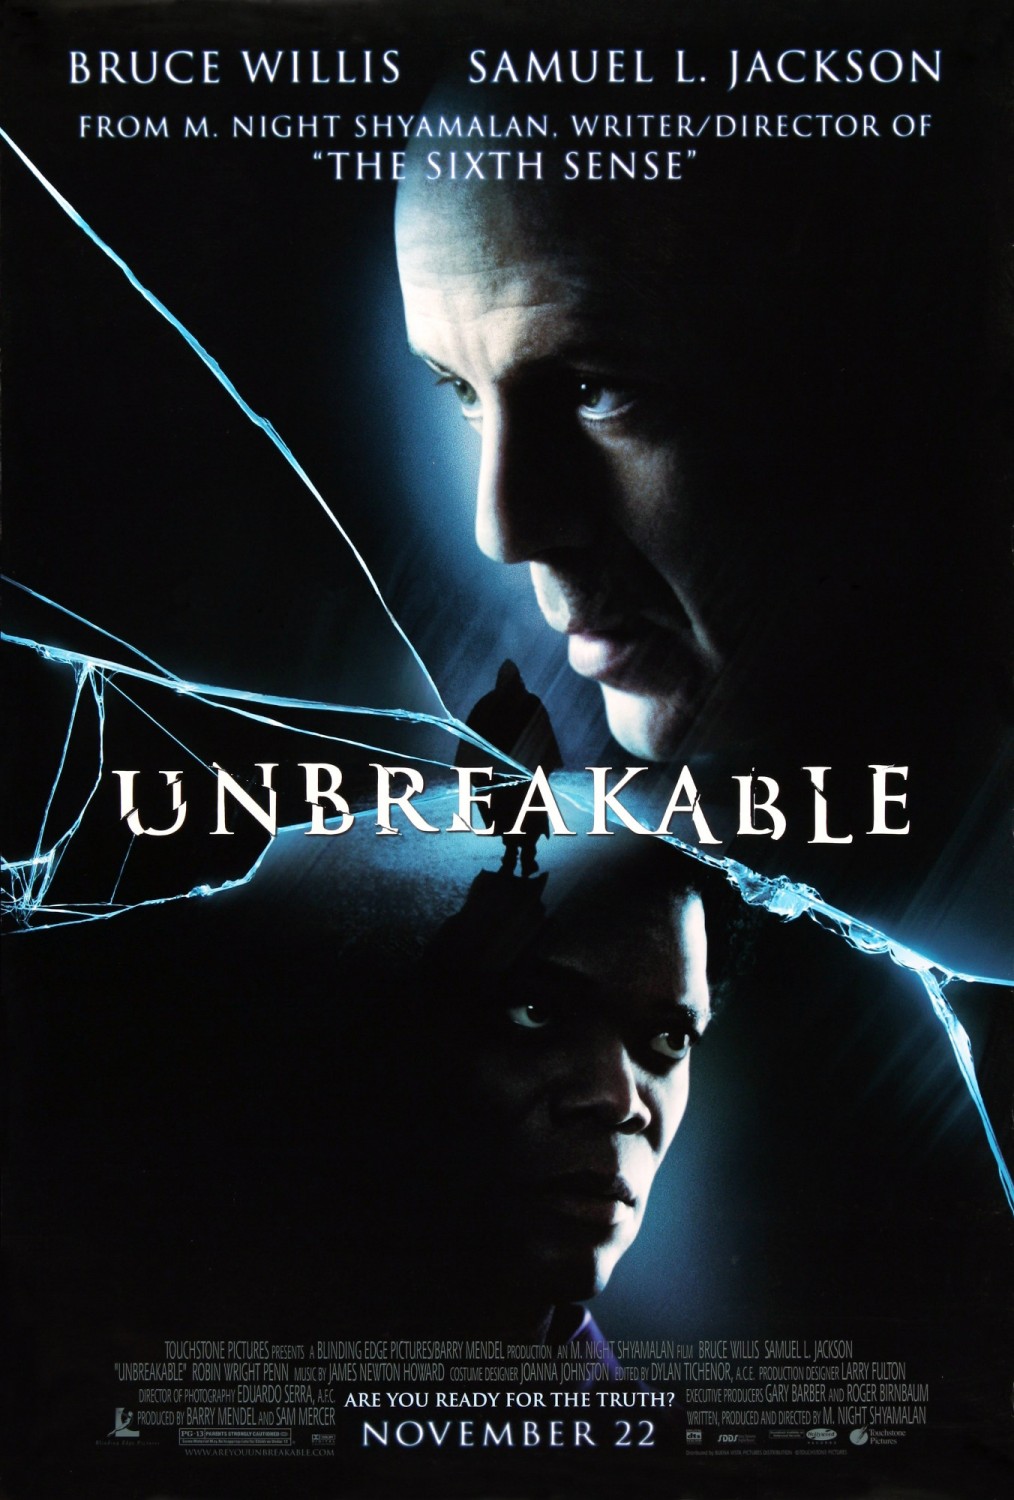 http://www.impawards.com/2000/posters/unbreakable_xlg.jpg